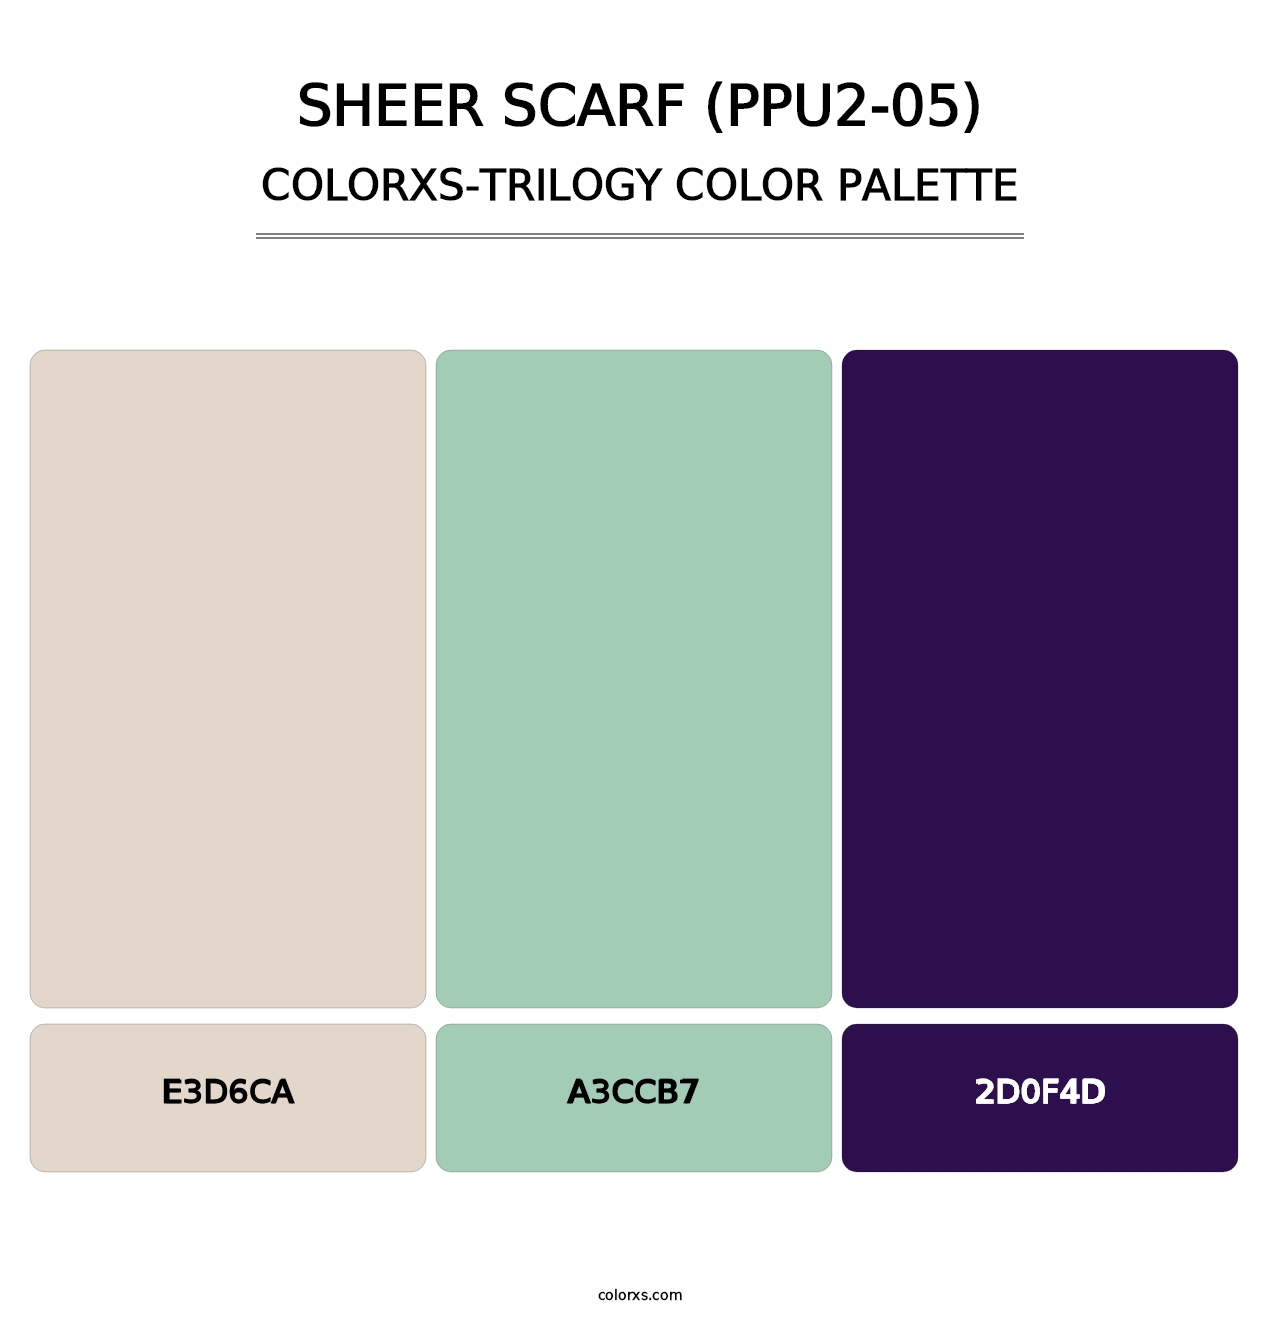 Sheer Scarf (PPU2-05) - Colorxs Trilogy Palette